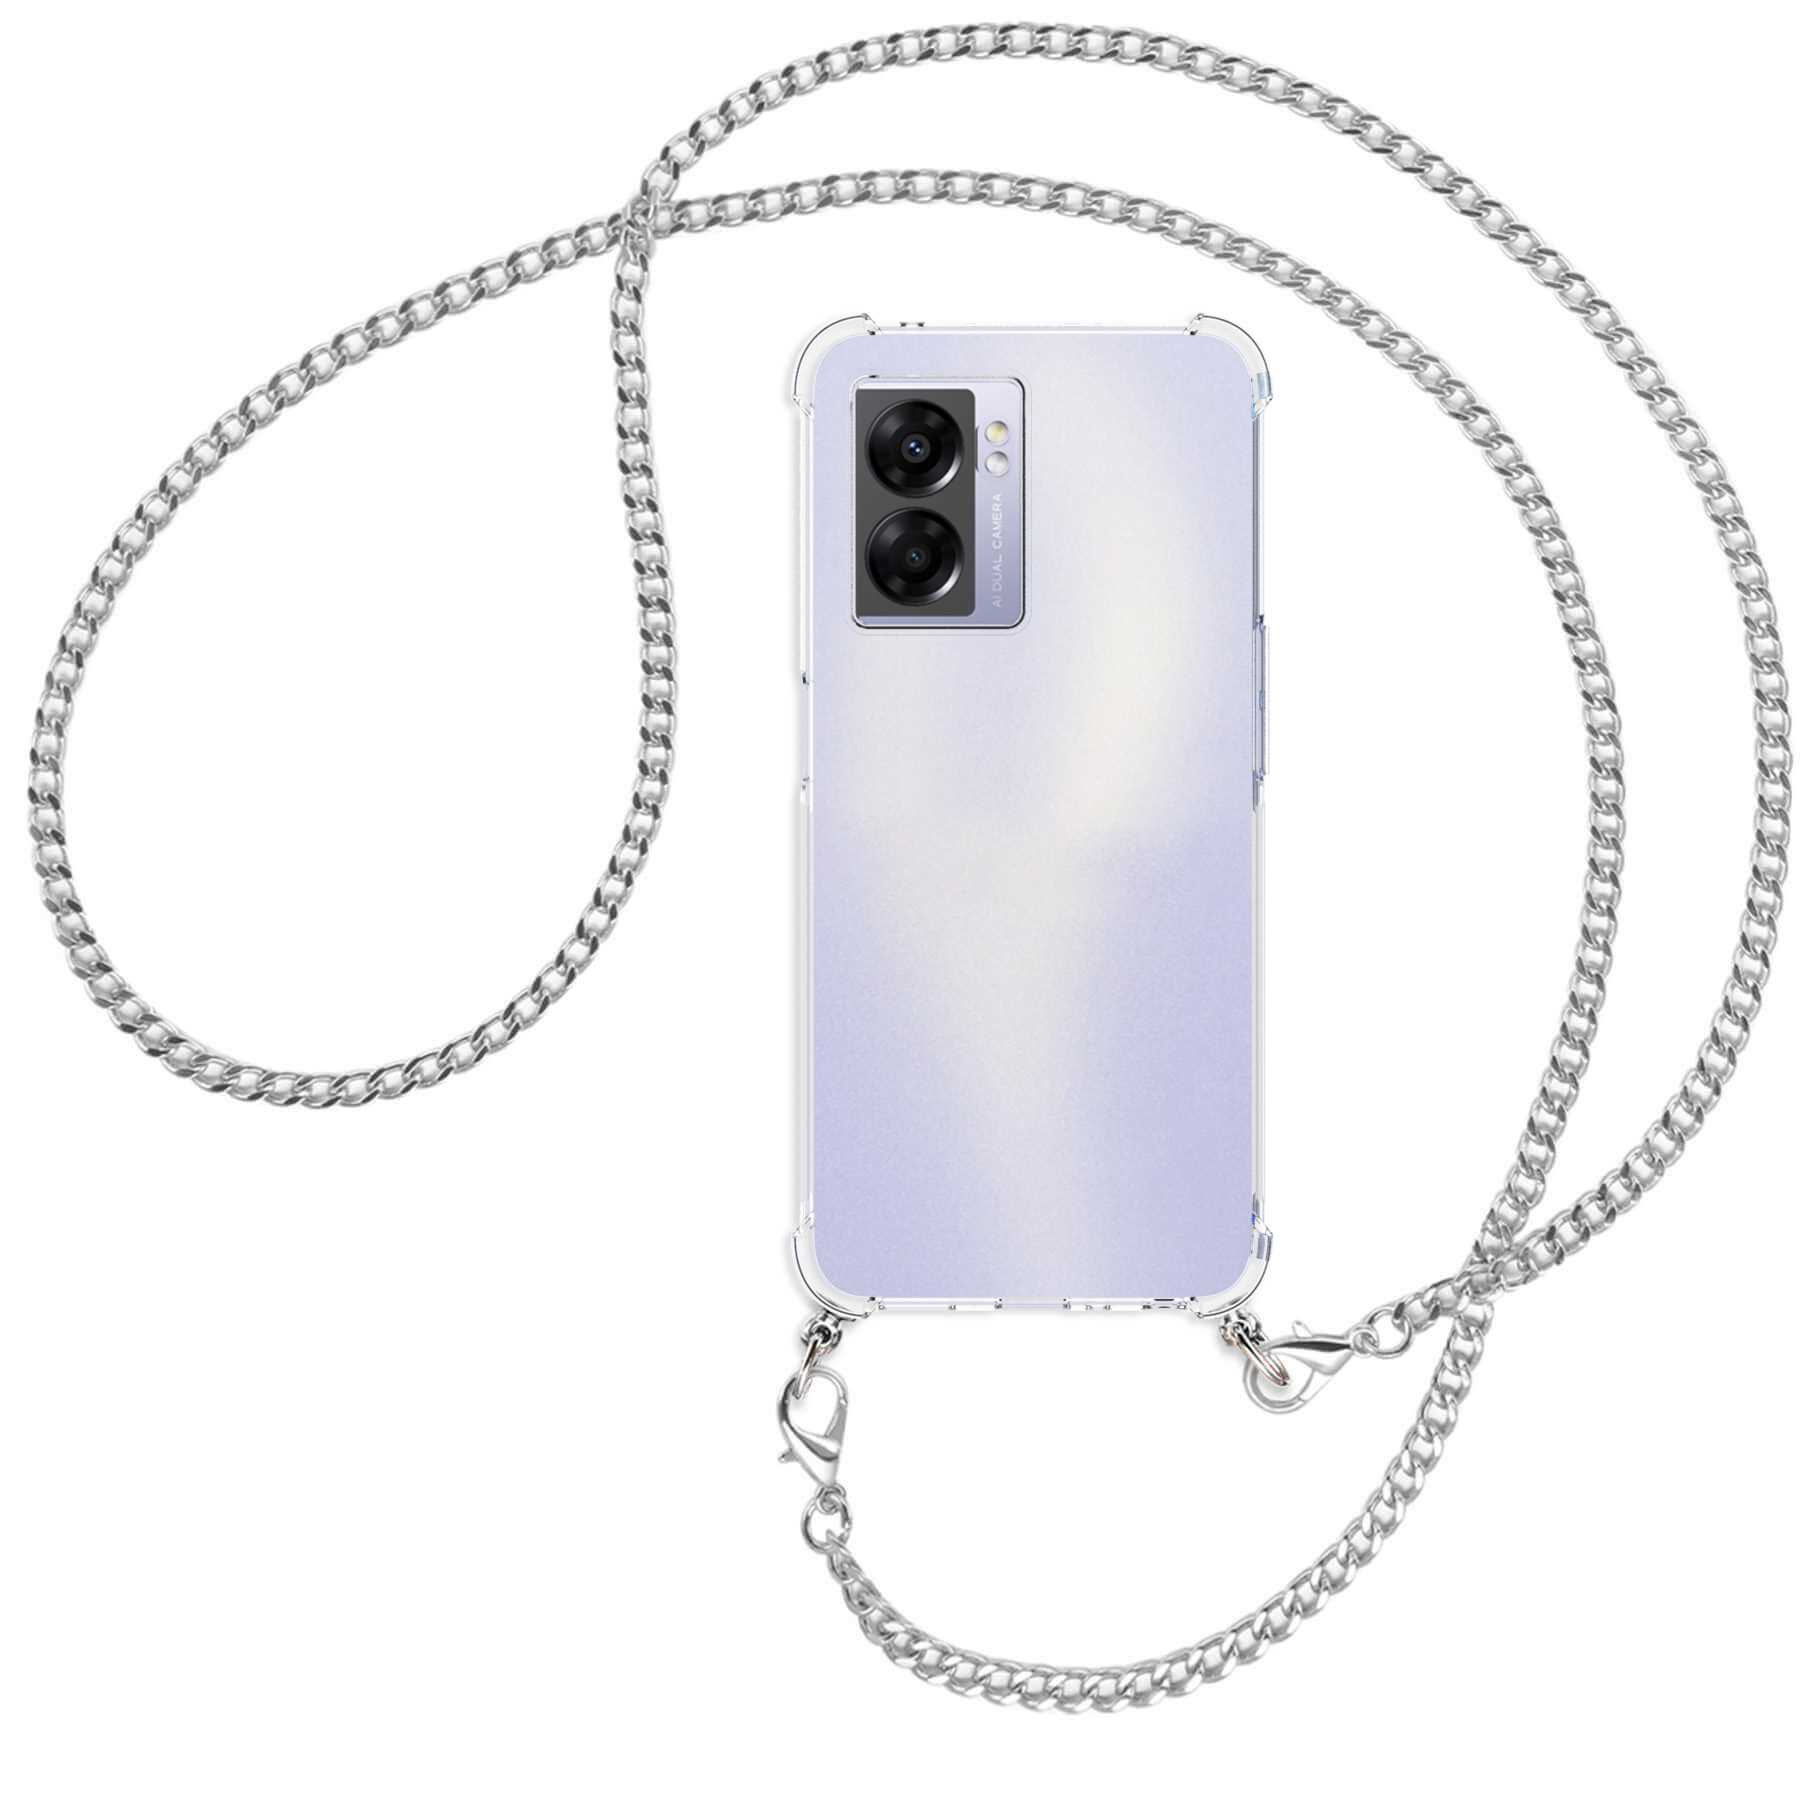 MTB MORE ENERGY Umhänge-Hülle Realme mit Oppo, (silber) Metallkette, 5G, 50 5G, A57 5G, A77 Kette Narzo Backcover